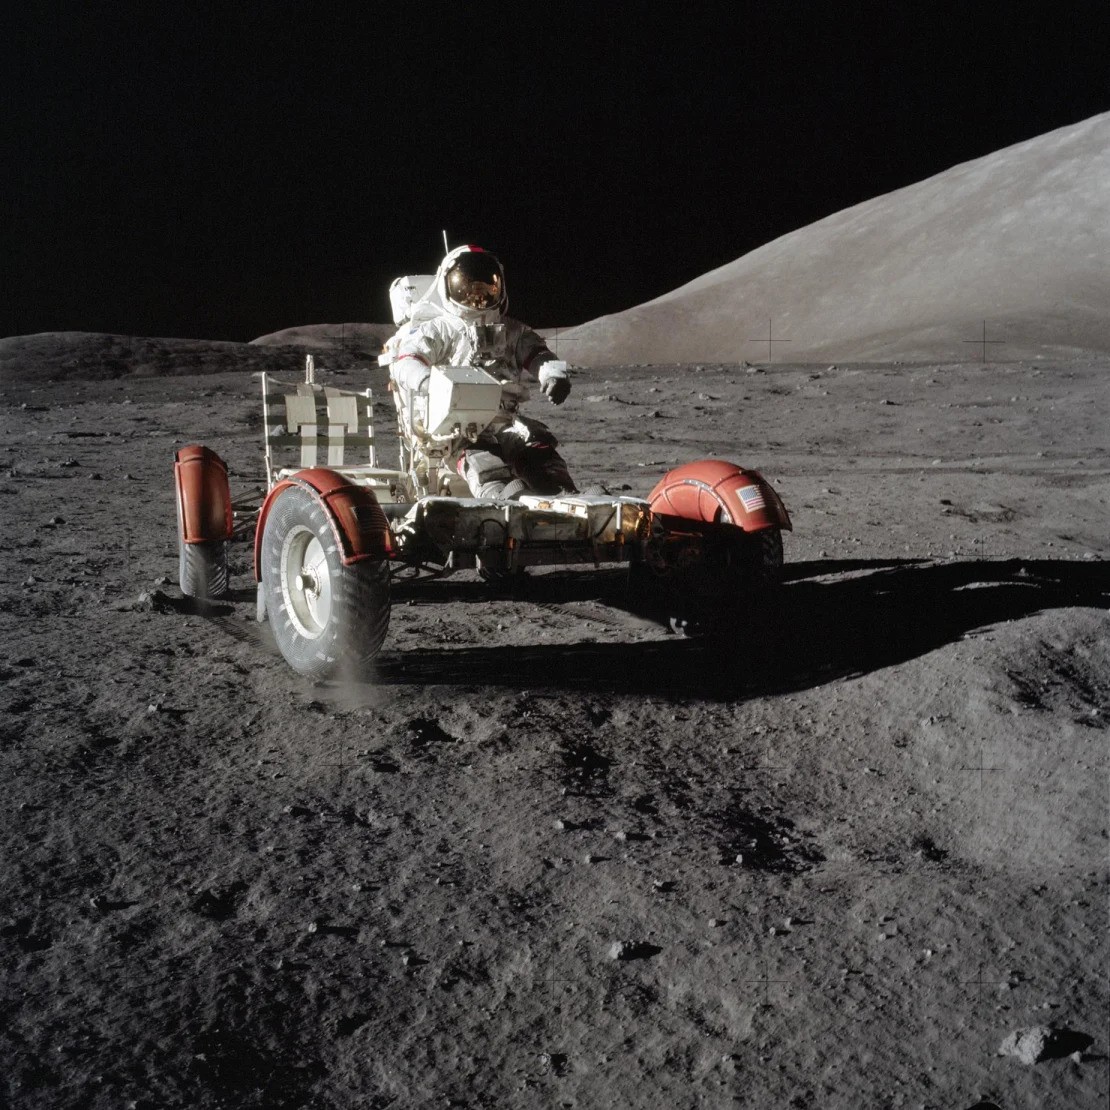 An astronaut driving a lunar roving vehicle on the moon's surface